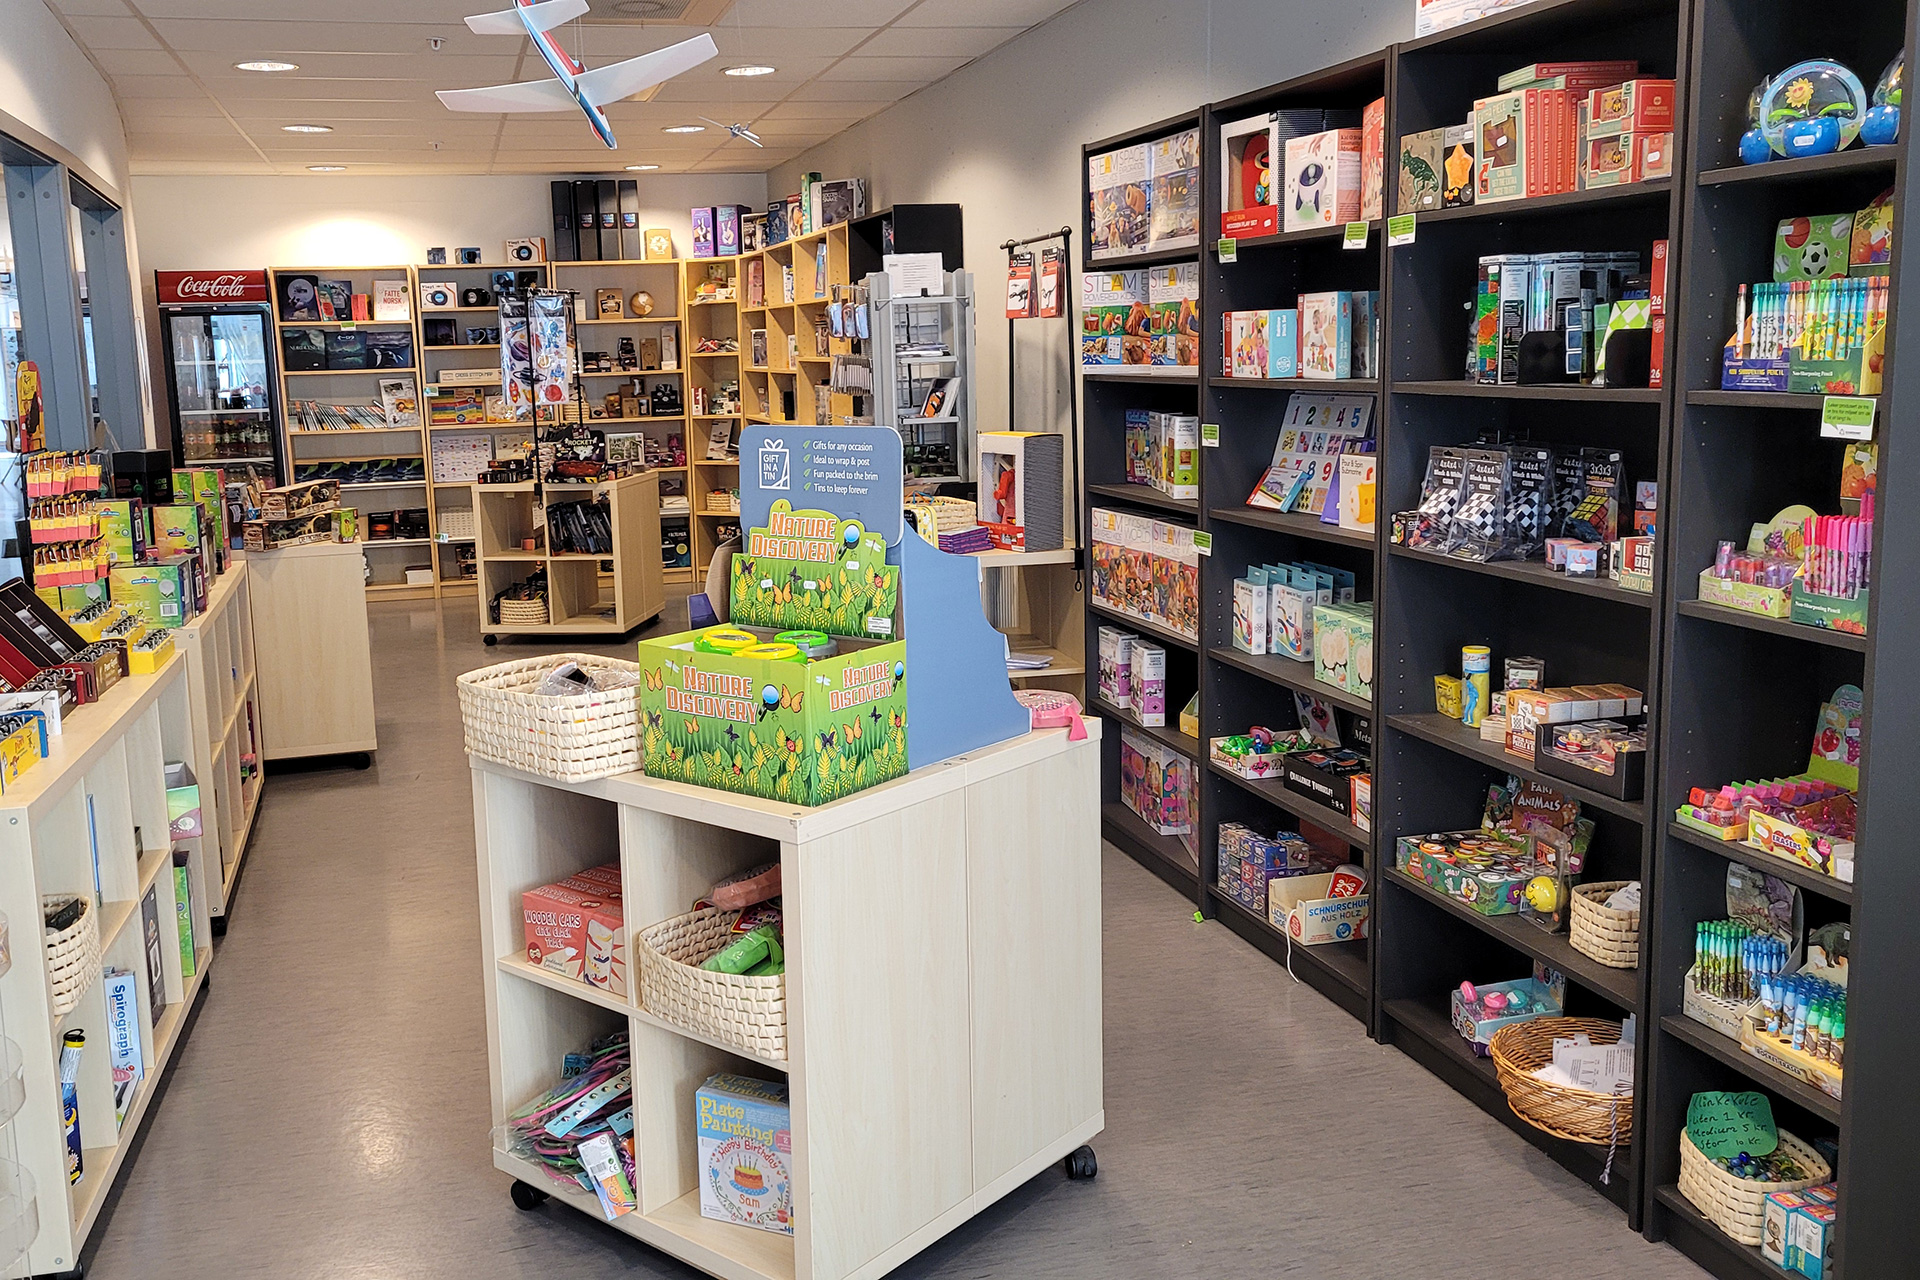 The Science Centre gift shop showing shelves with exciting products, such as books and toys.